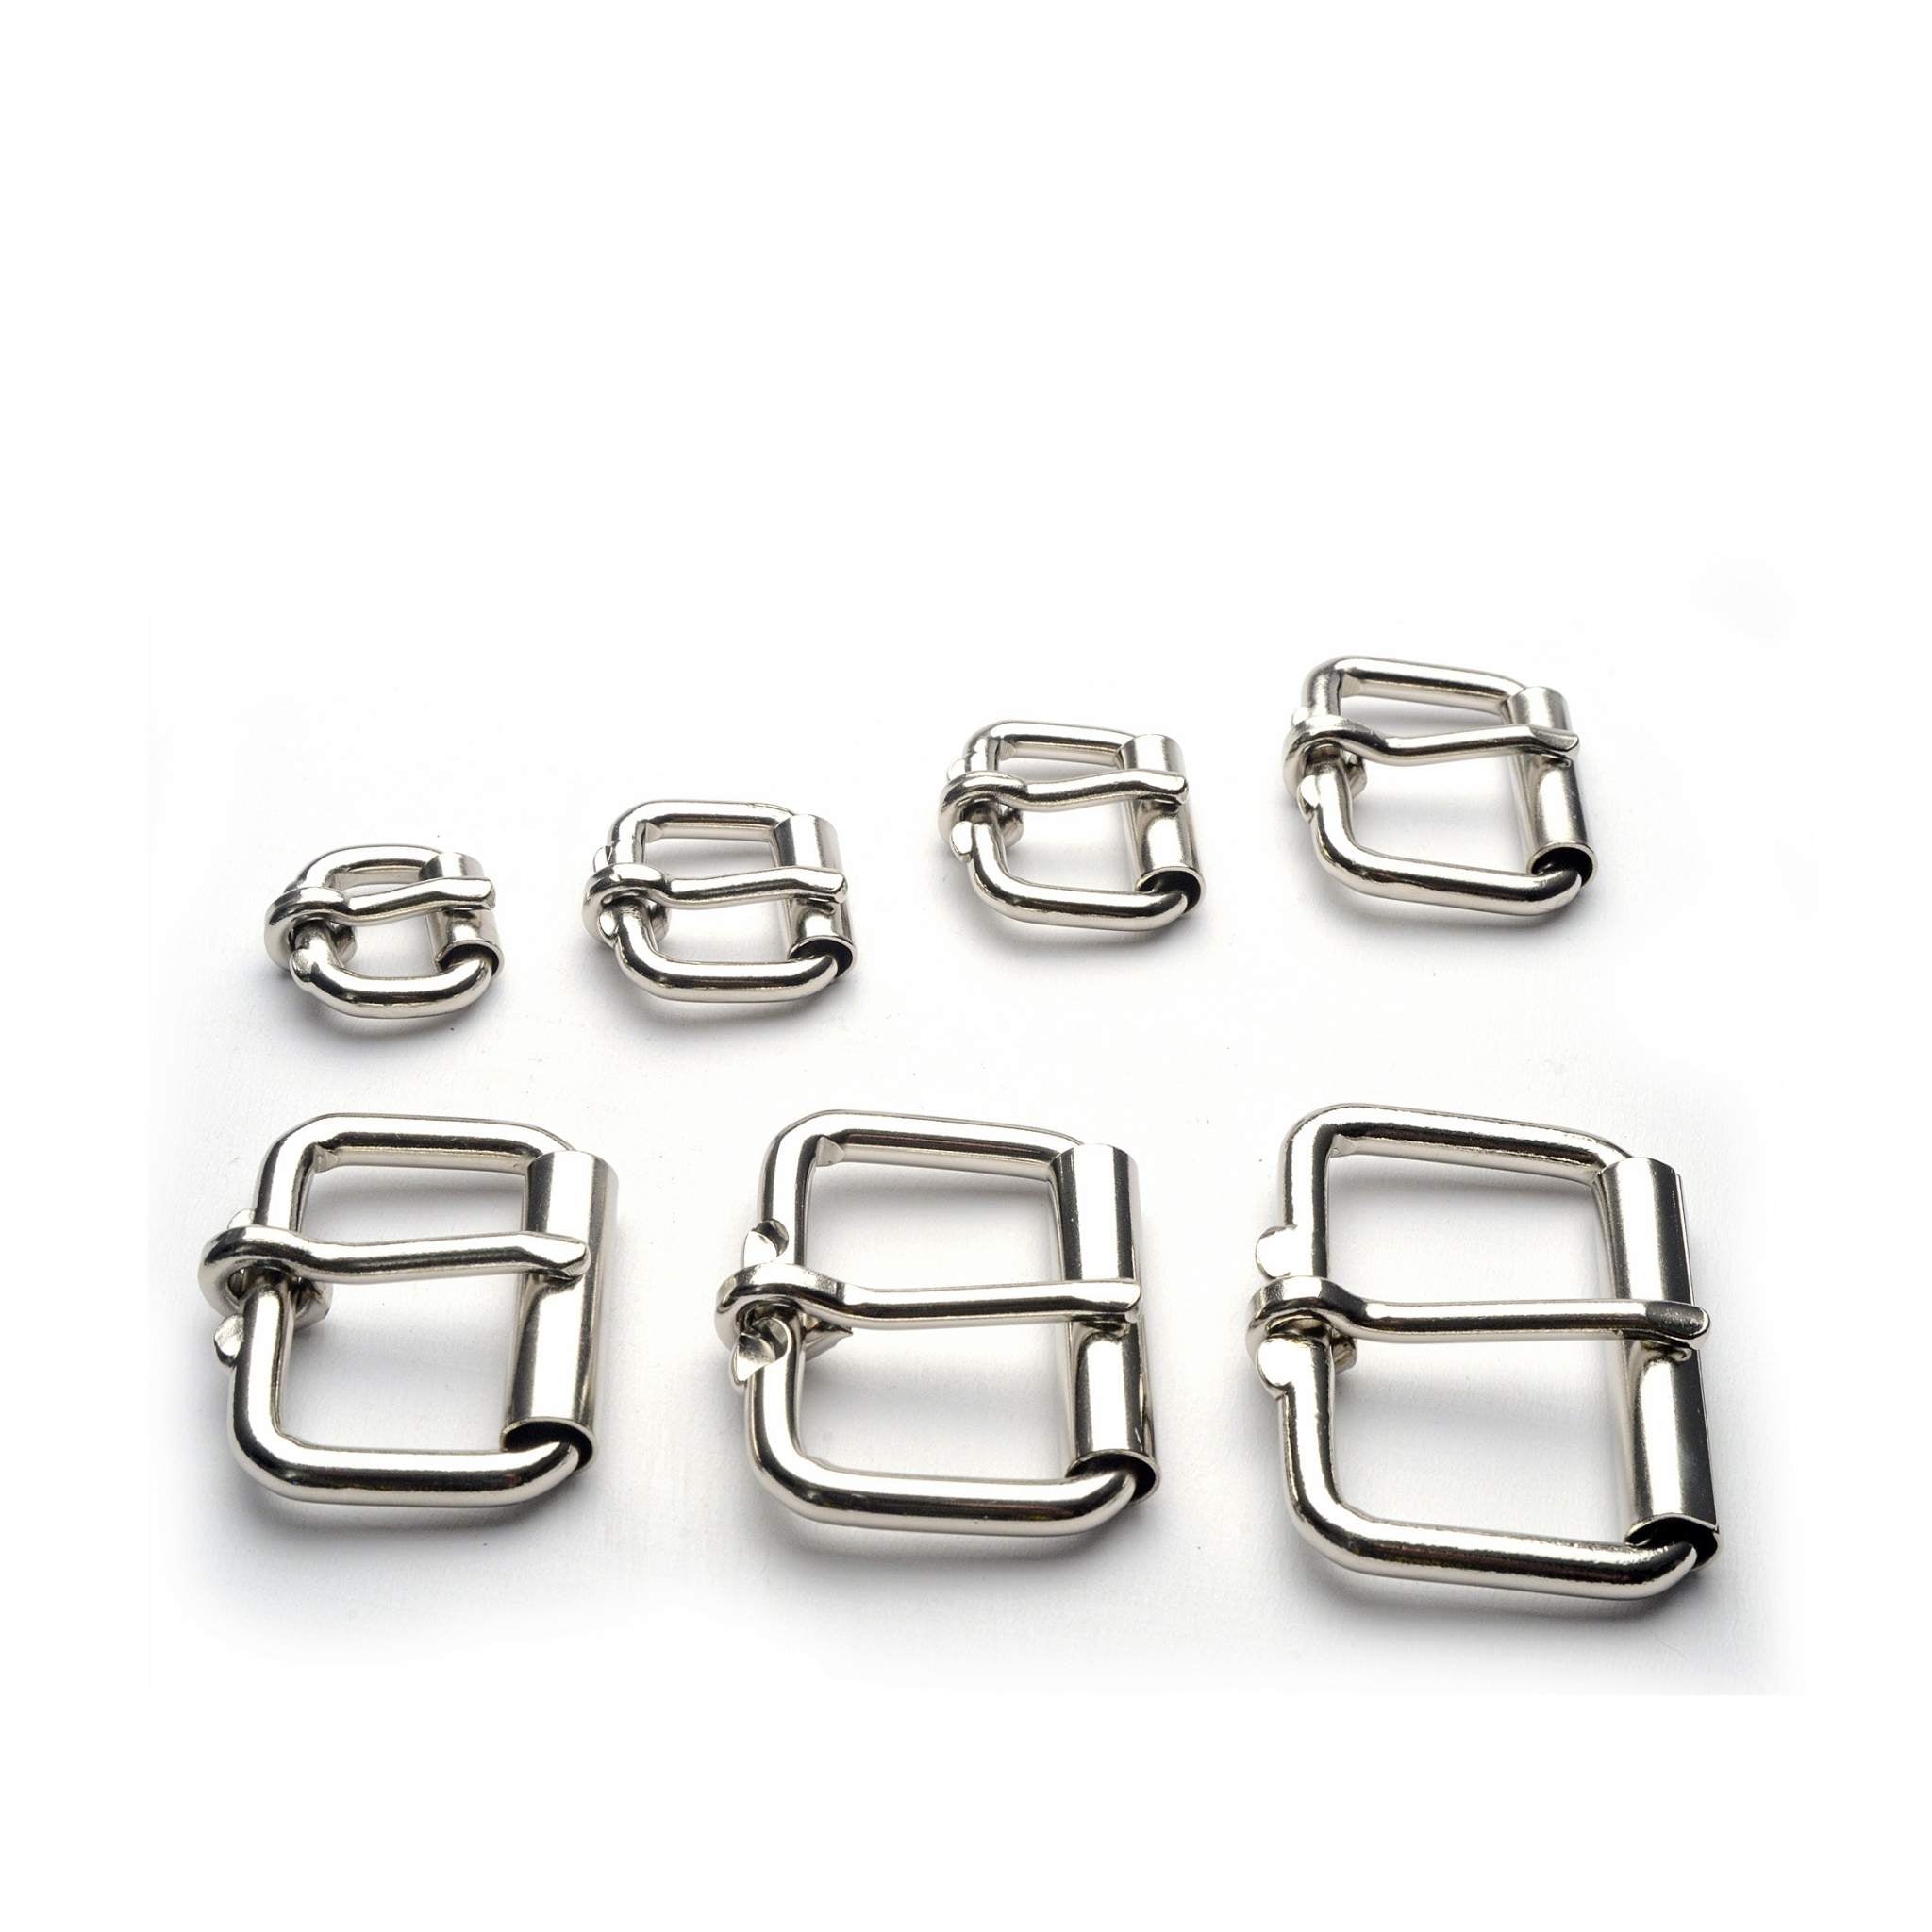 Heel bar roller buckles for straps and belts - available in 7 size options.  Nickel plated steel solid frame general purpose strap buckle with roller which helps with tightening and loosening. Ideal for watch straps, bag and satchel straps, pet collars, arm braces etc.